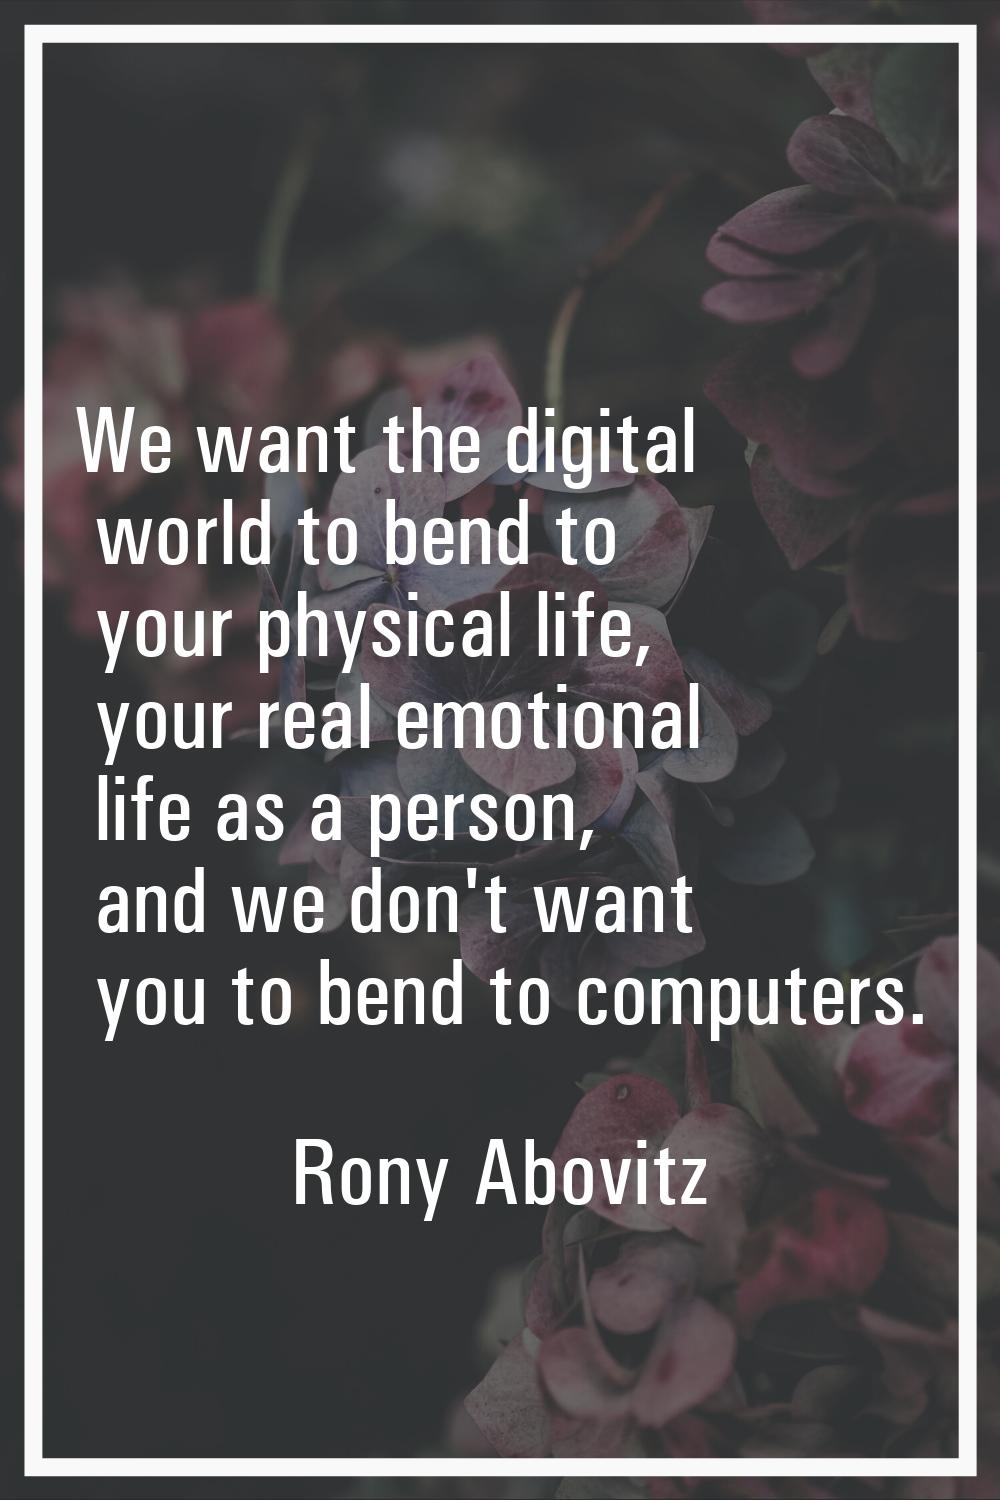 We want the digital world to bend to your physical life, your real emotional life as a person, and 